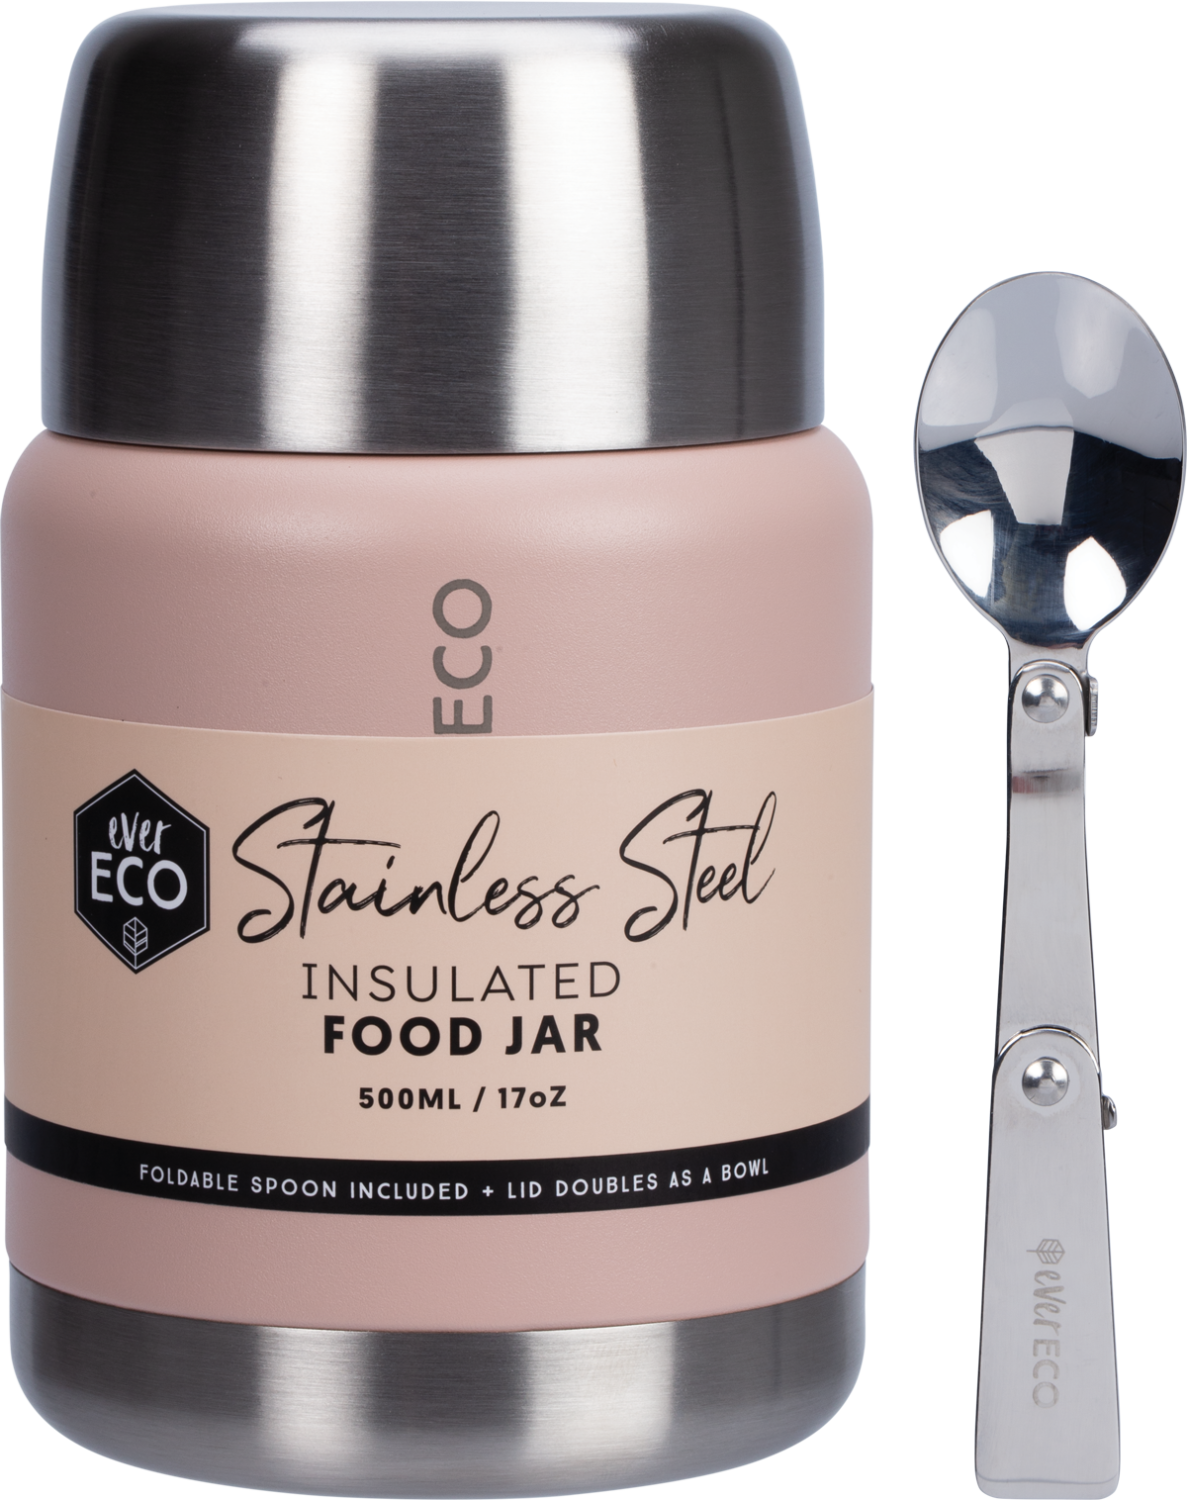 Ever Eco Stainless Steel Insulated Food Jar 500ml Rose